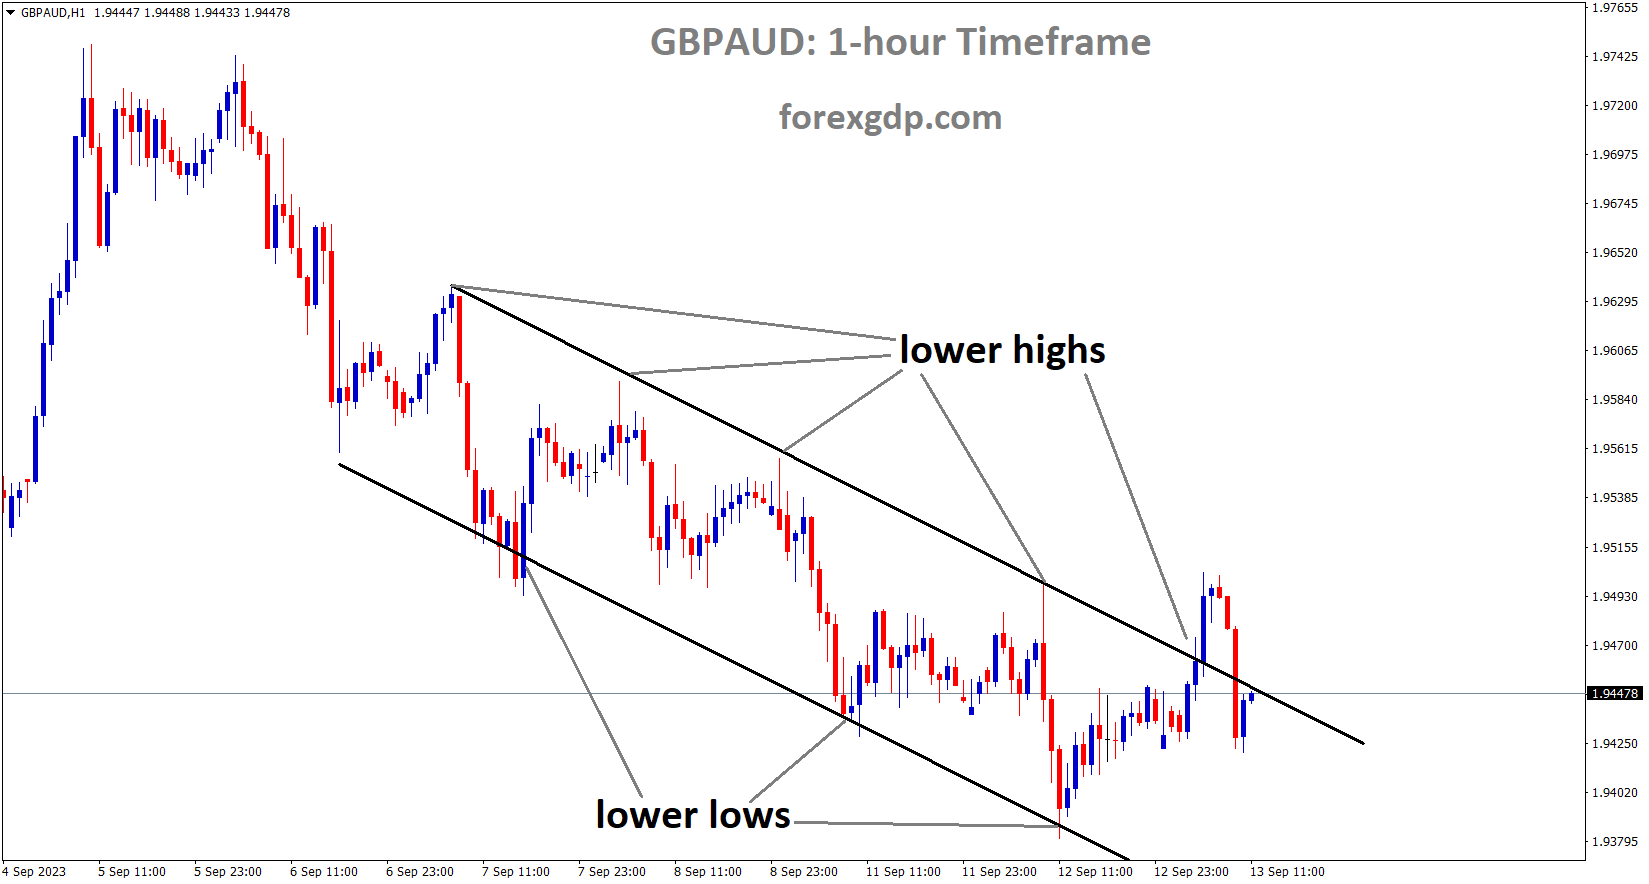 GBPAUD is moving in Descending channel and market has reached lower high area of the channel